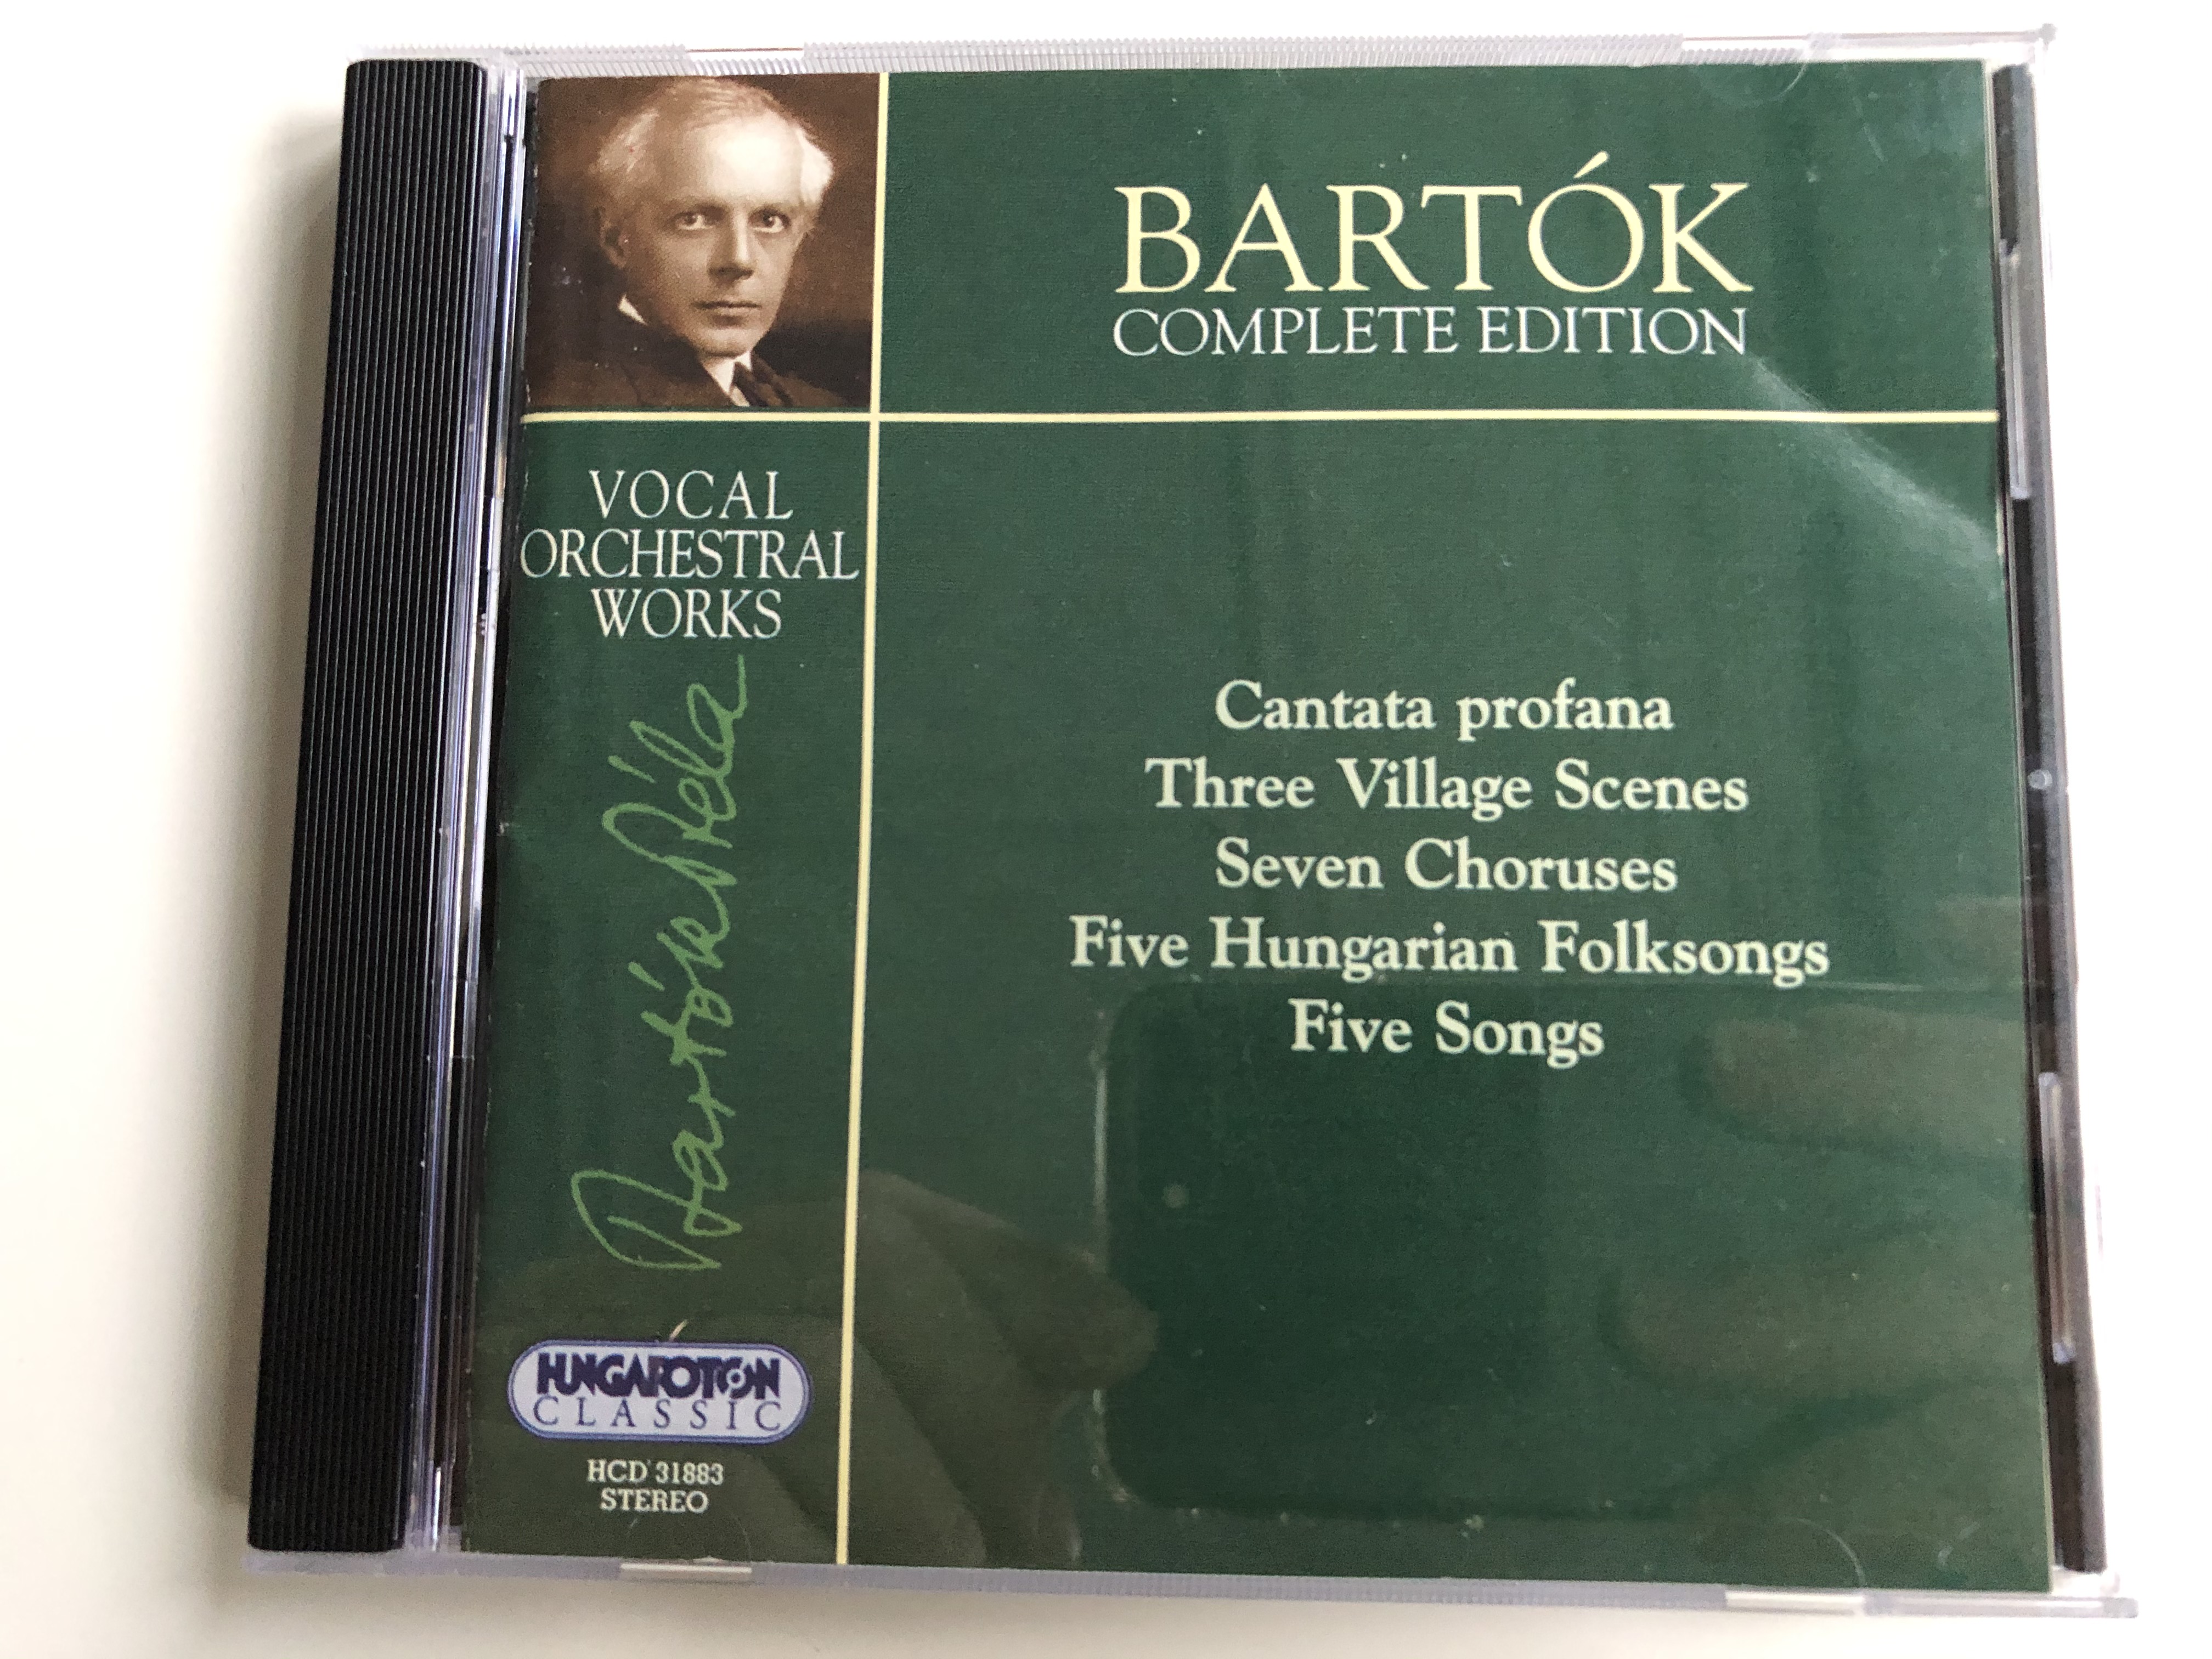 bartok-complete-edition-vocal-orchestral-works-cantata-profana-three-village-scenes-seven-choruses-five-hungarian-folksongs-five-songs-hungaroton-classic-audio-cd-2000-stereo-hcd-31883-1-.jpg